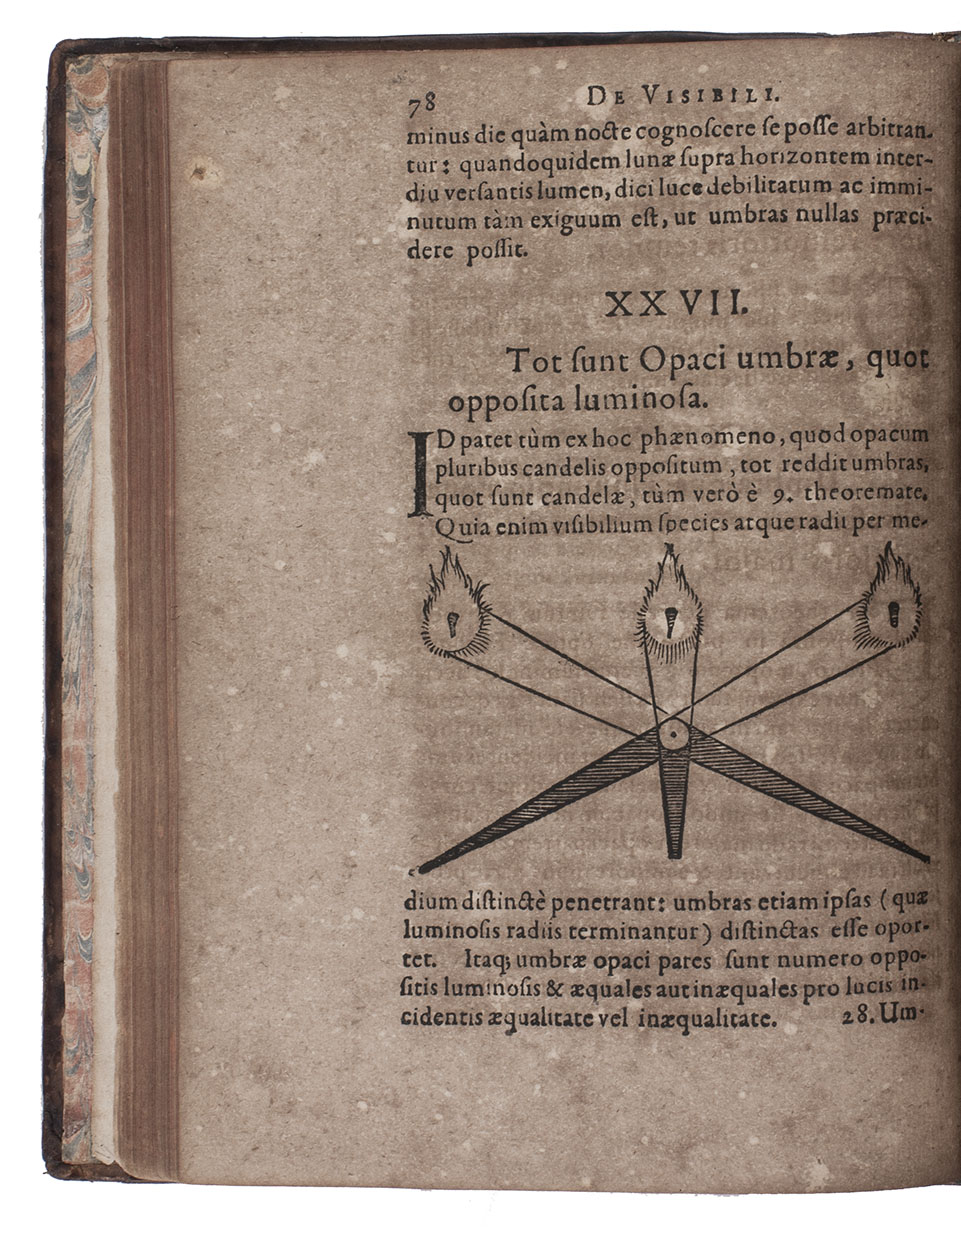 RISNER, Friedrich. - Opticae libri quatuor ex voto Petri Rami novissimo Fridericum Risnerum per ejusdem in mathematicis adjutorem olim conscripti, ...Kassel, Wilhelm Wessel (sold by Johann Berner in Frankfurt), 1615. 4to. With numerous optical, astronomical and mathematical woodcut diagrams in text, woodcut headpieces, tailpieces and initials, and headpieces built up from cast fleurons. 18th-century tan calf, gold-tooled double fillets, re-backed in sheepskin.